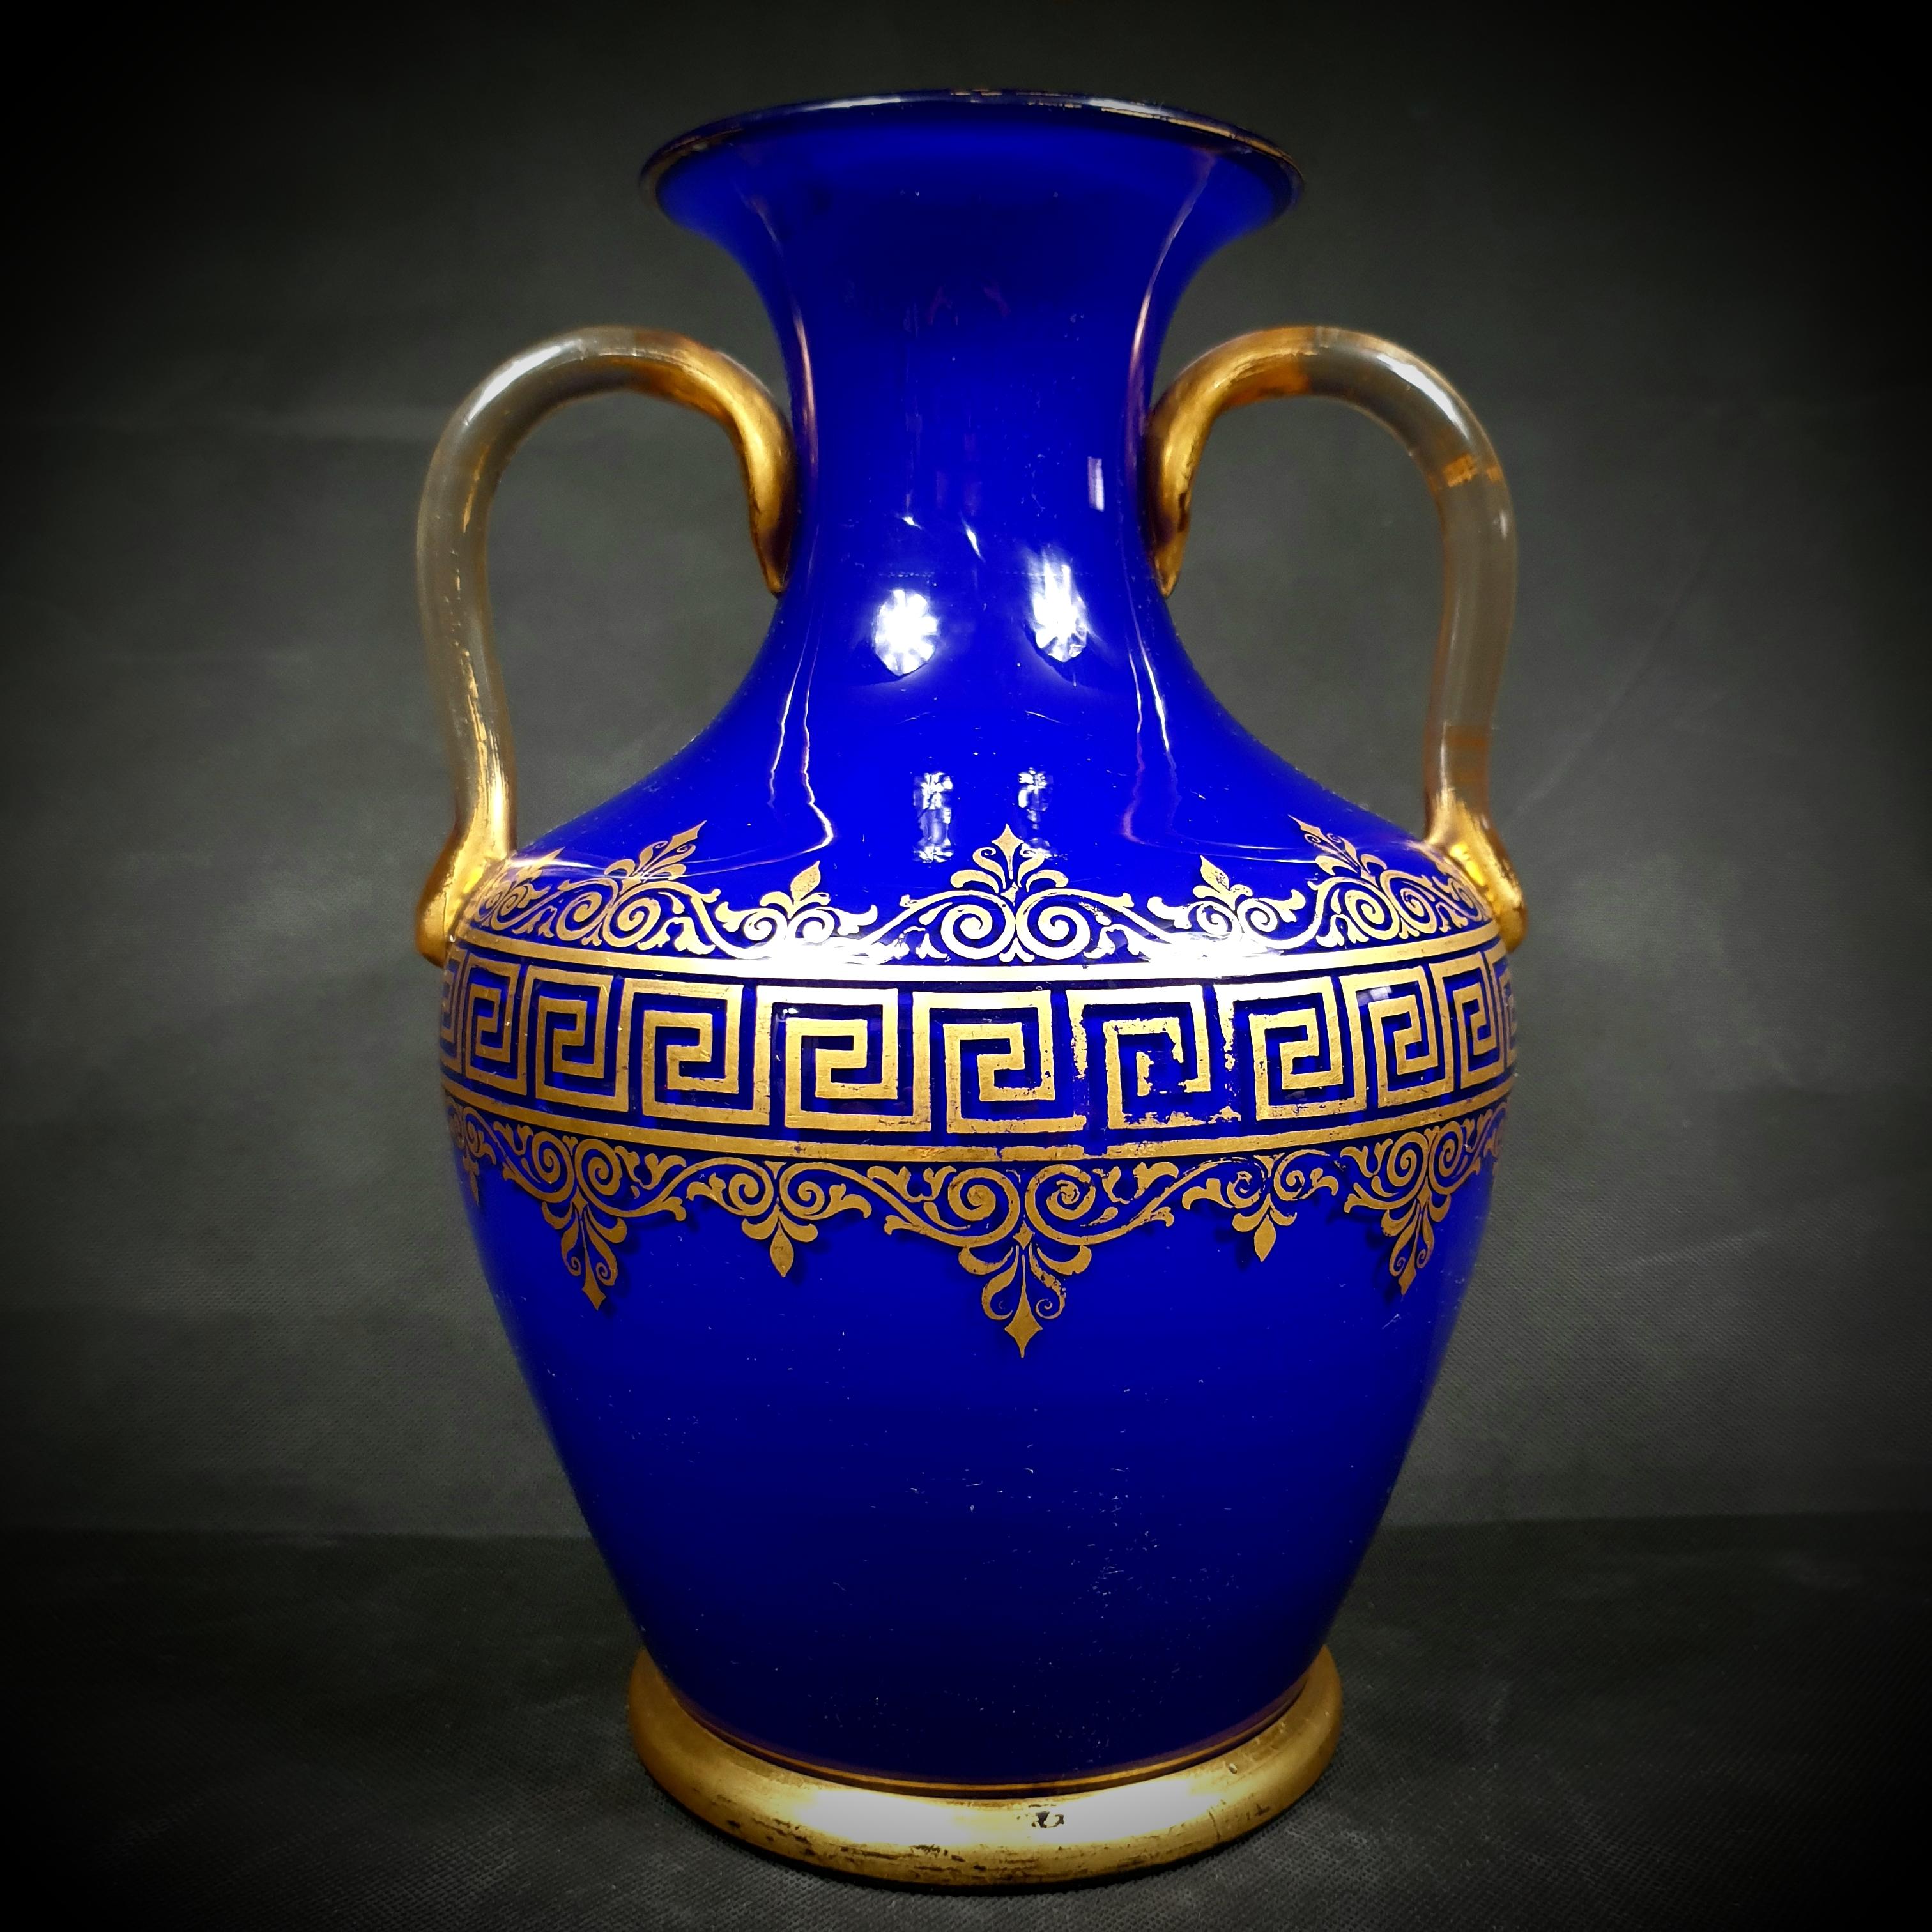 Looking for a timeless piece to elevate your home décor? Look no further than this exquisite antique opaline glass vase, a stunning addition to any room. Made in France between 1850 and 1920, this deep blue spherical vase boasts intricate geometric